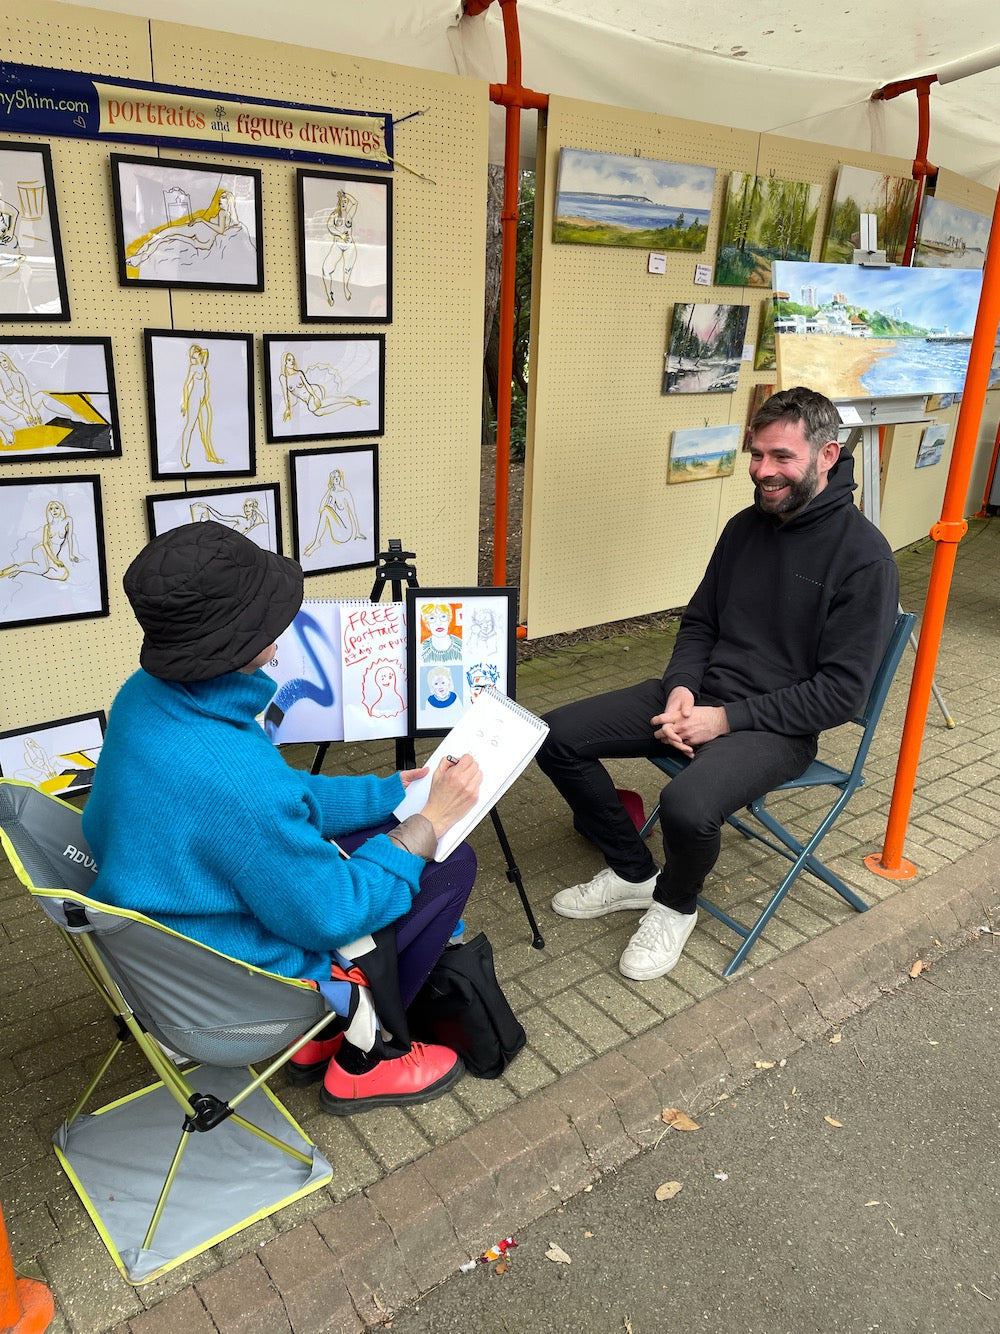 Artist Frankie Sinclair draws customer Steve at the Bournemouth Art Makers Market on 9 April 2023